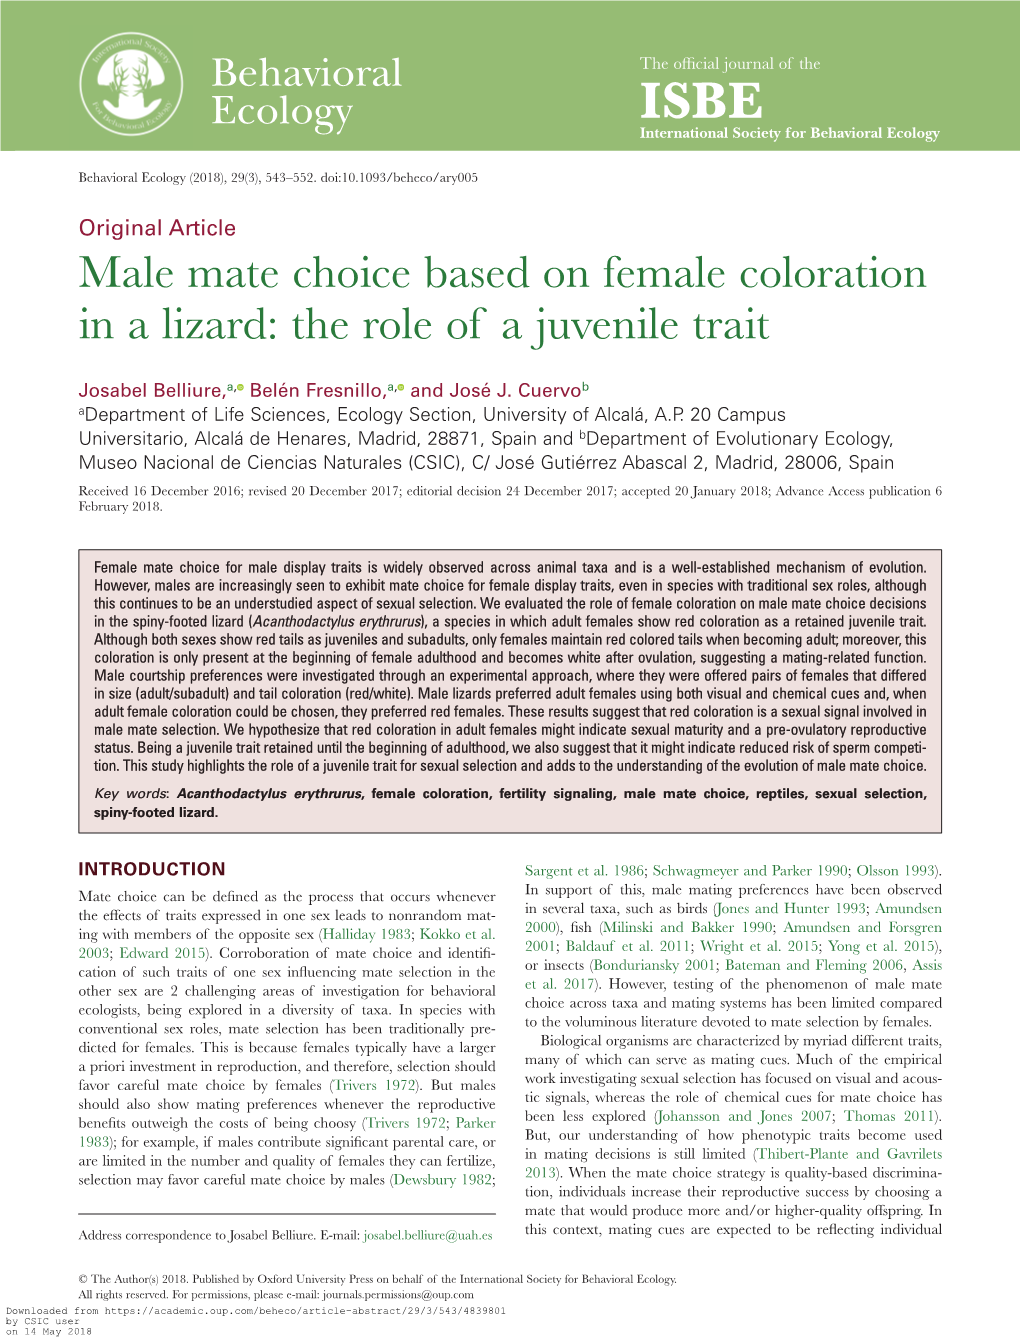 Male Mate Choice Based on Female Coloration in a Lizard: the Role of a Juvenile Trait